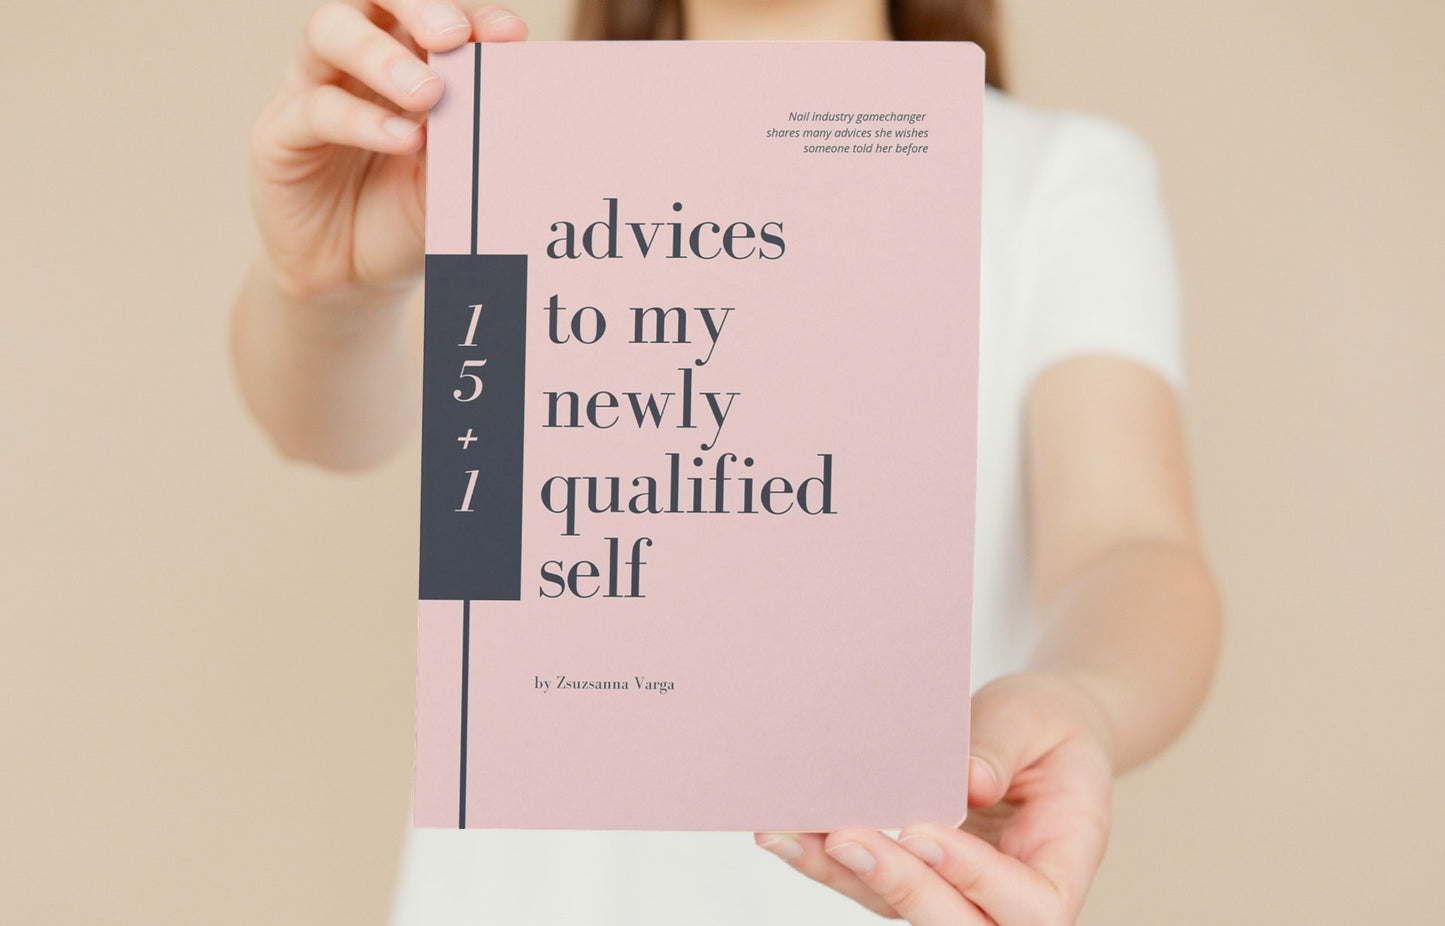 15+1 advices to my newly qualified self